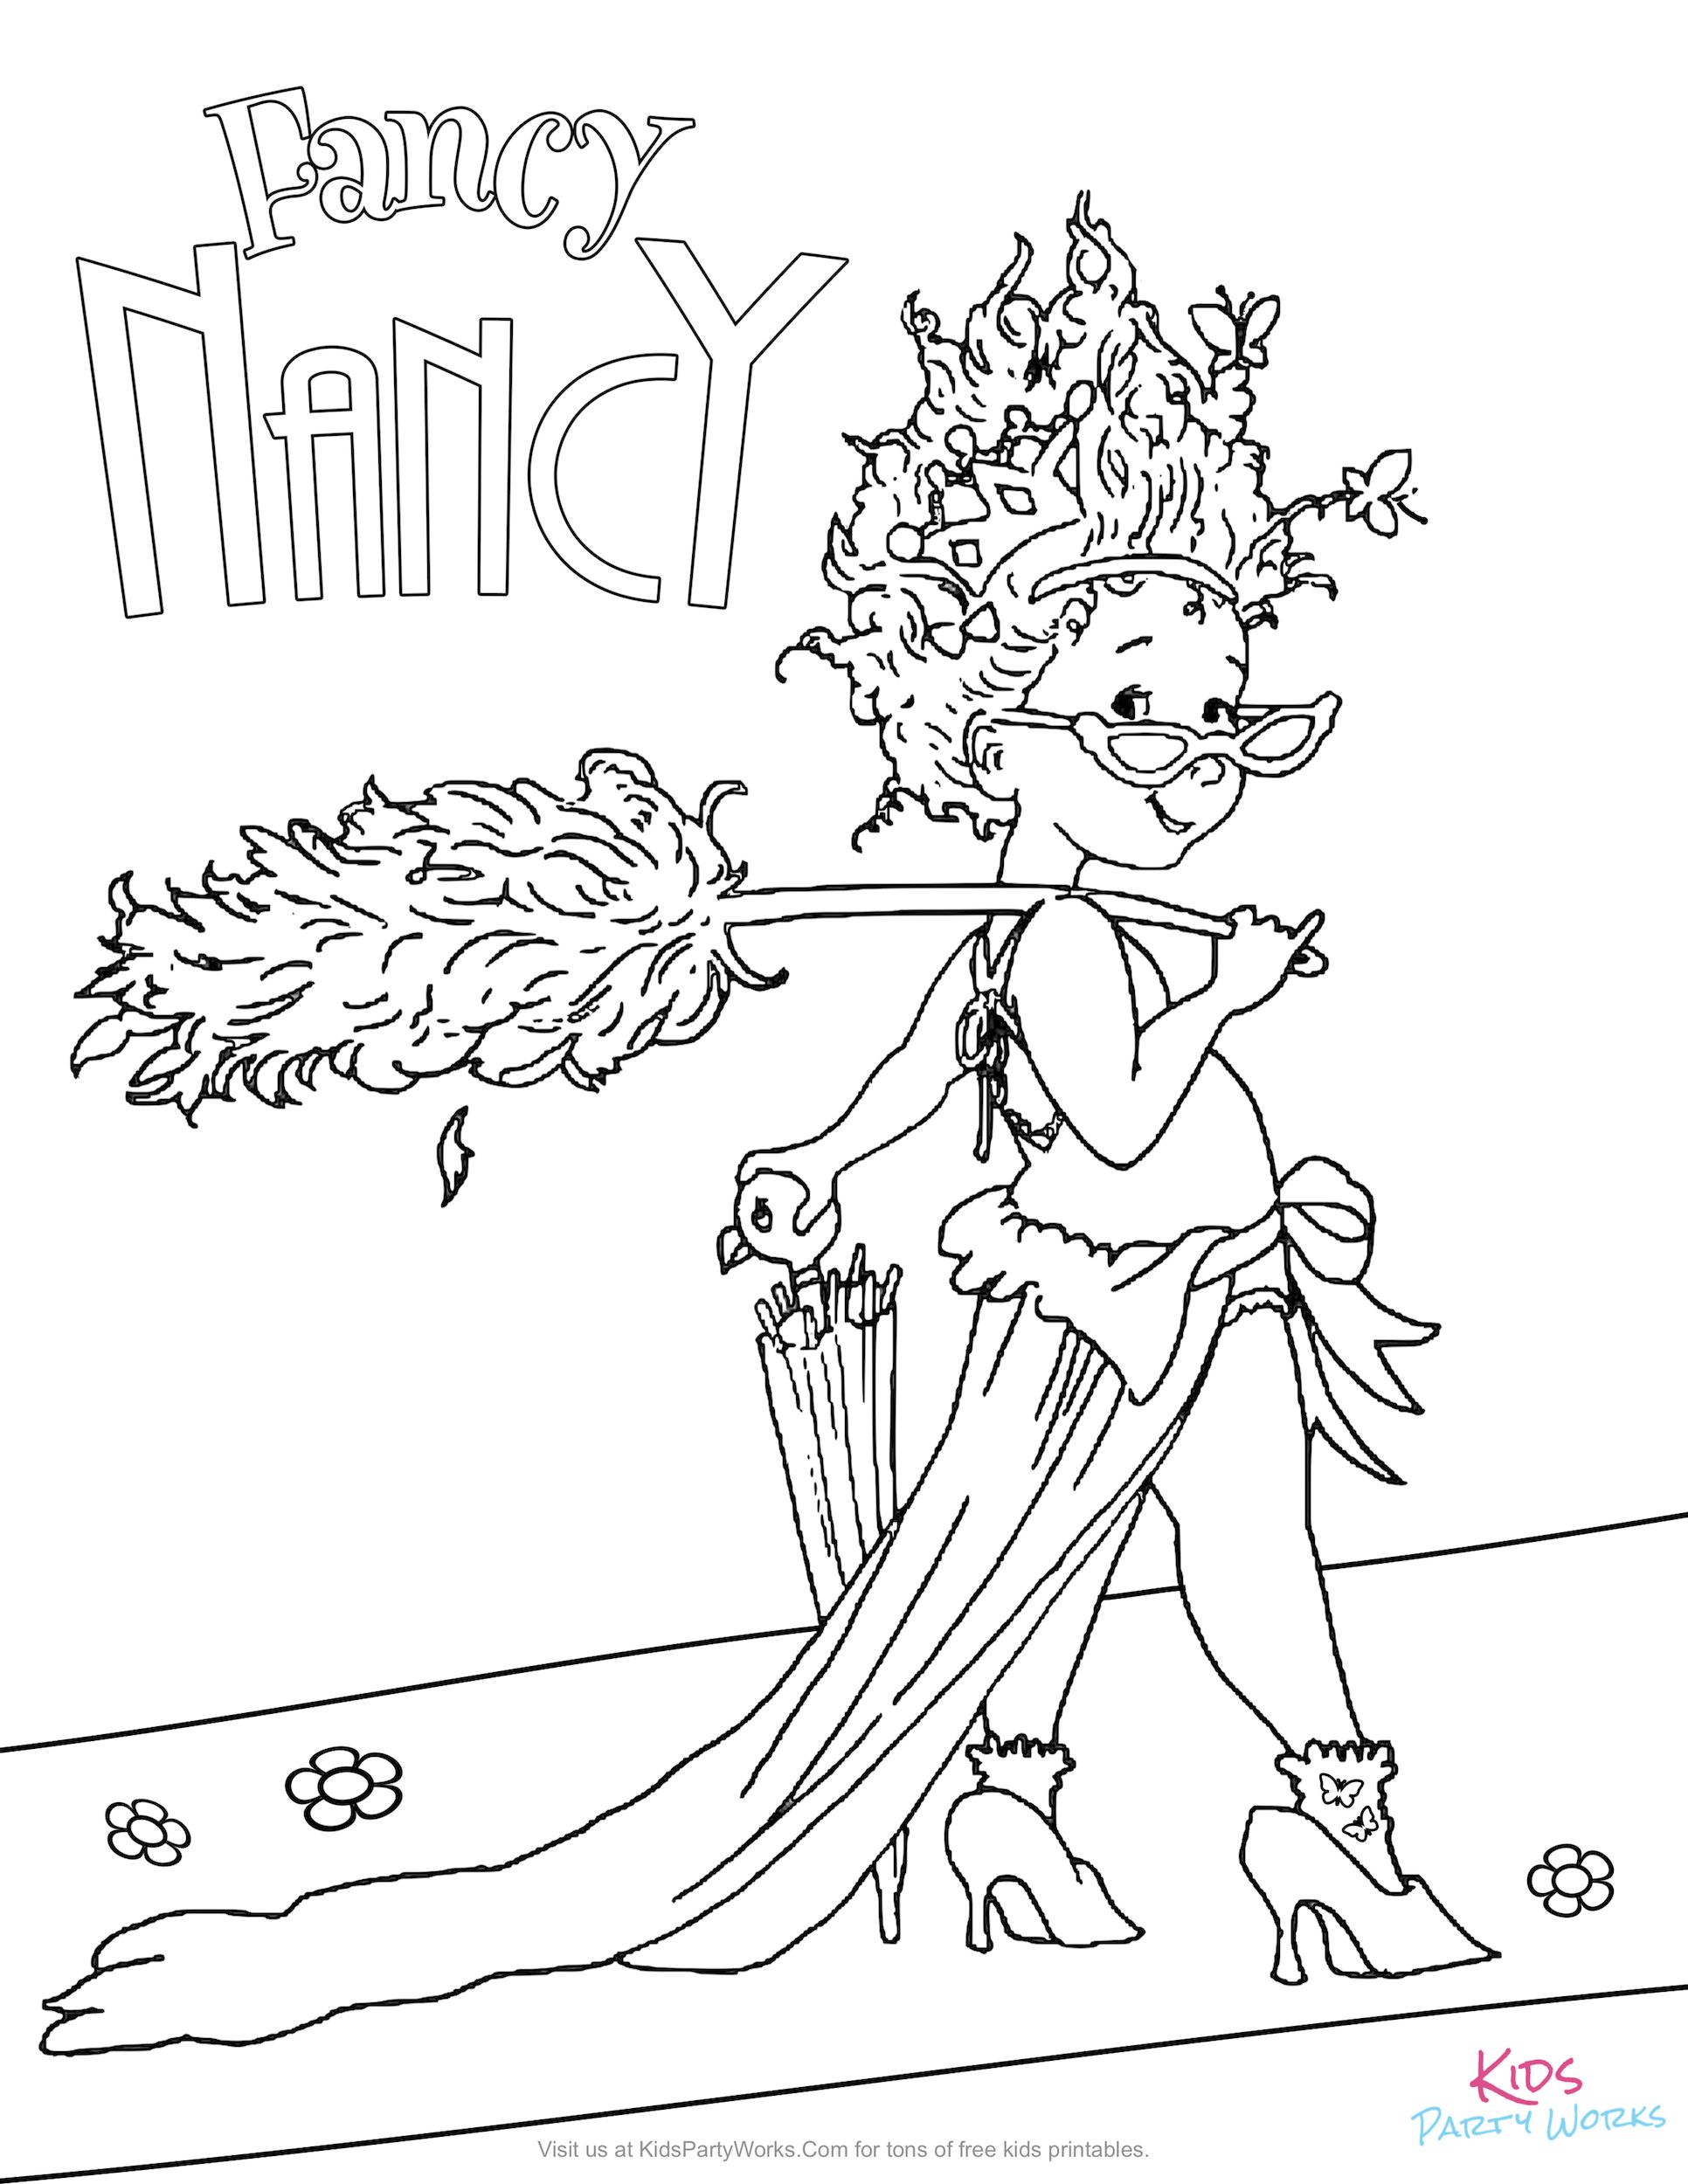 Have fun coloring this free Fancy Nancy coloring page for kids from the new  Disney Jr. show. | Fancy nancy party, Fancy nancy, Mermaid coloring pages